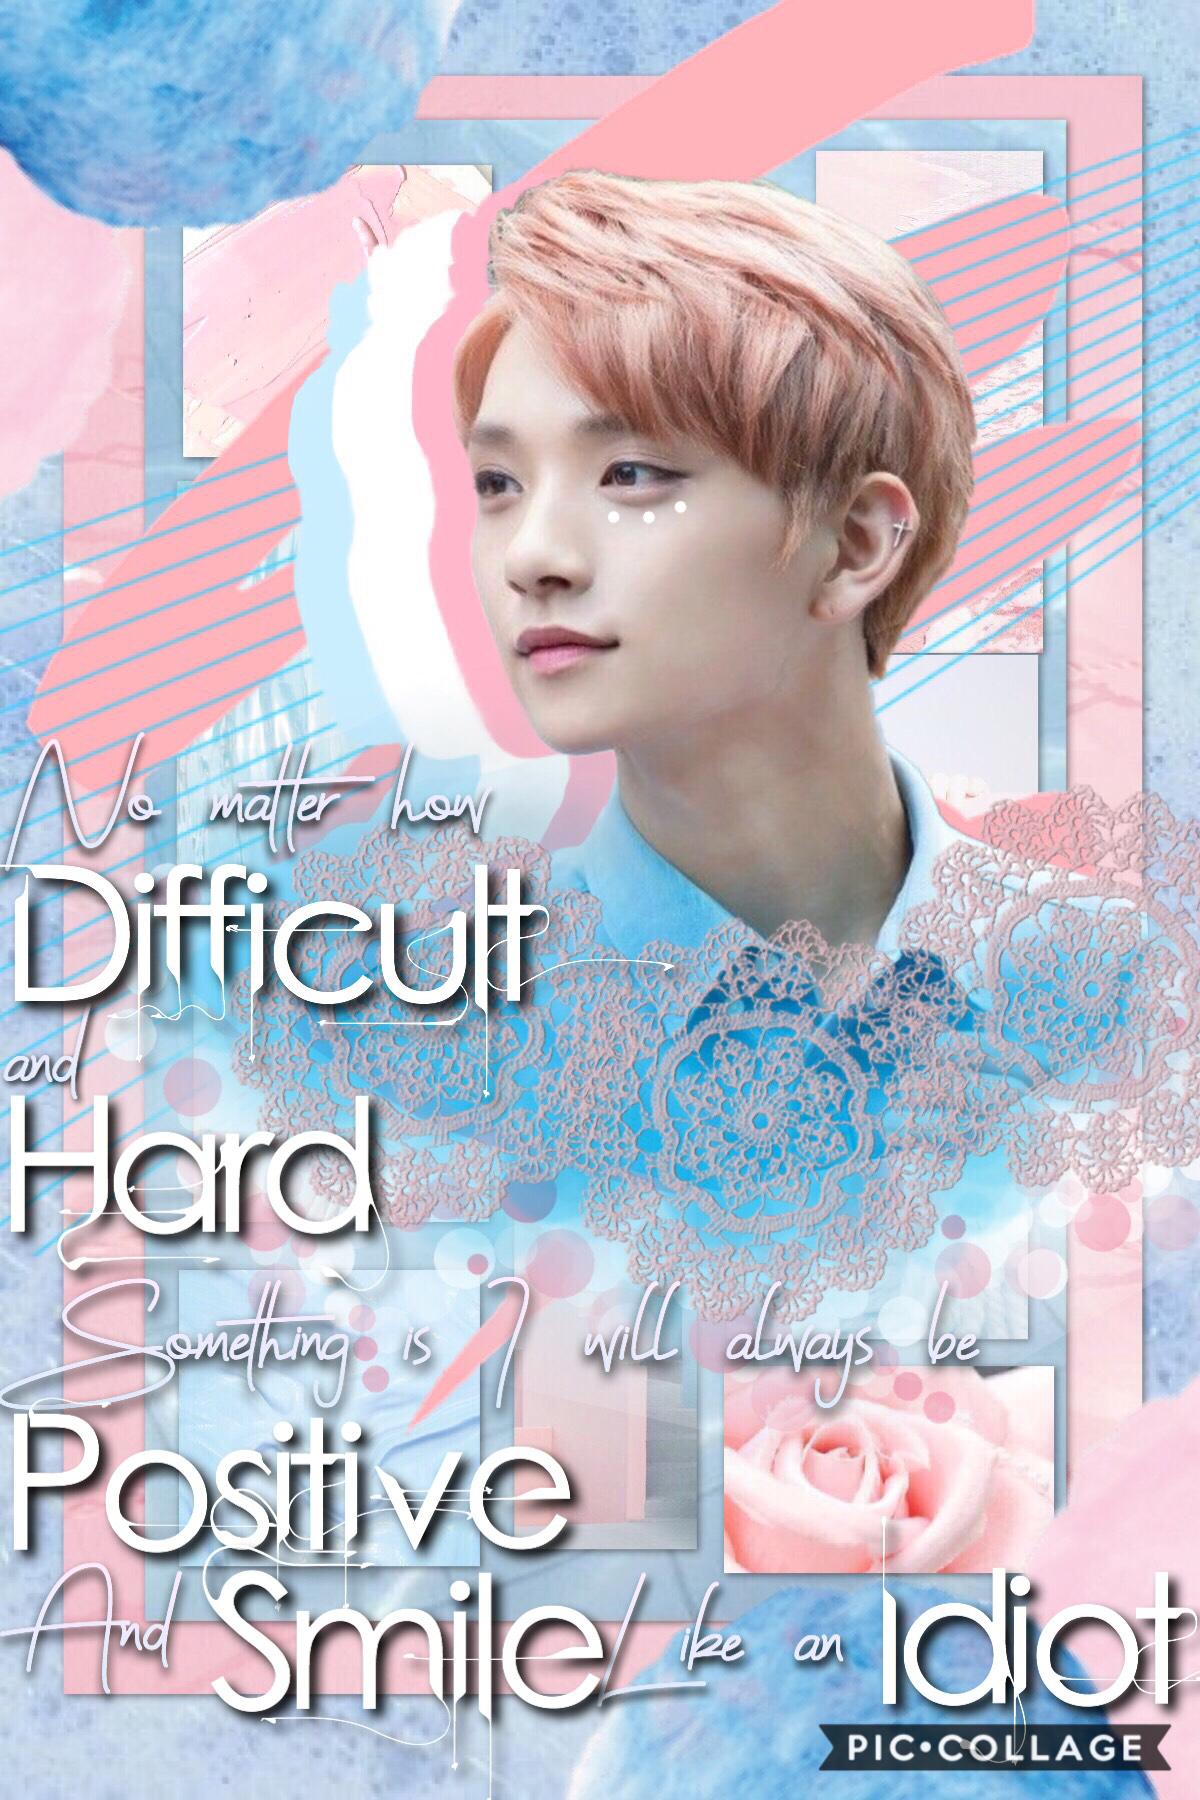 I mentioned about making the edit wrong and doing pastels instead of bright colors of this Joshua edit on my main, but then again I have nothing to post here so I’ll put it here👍